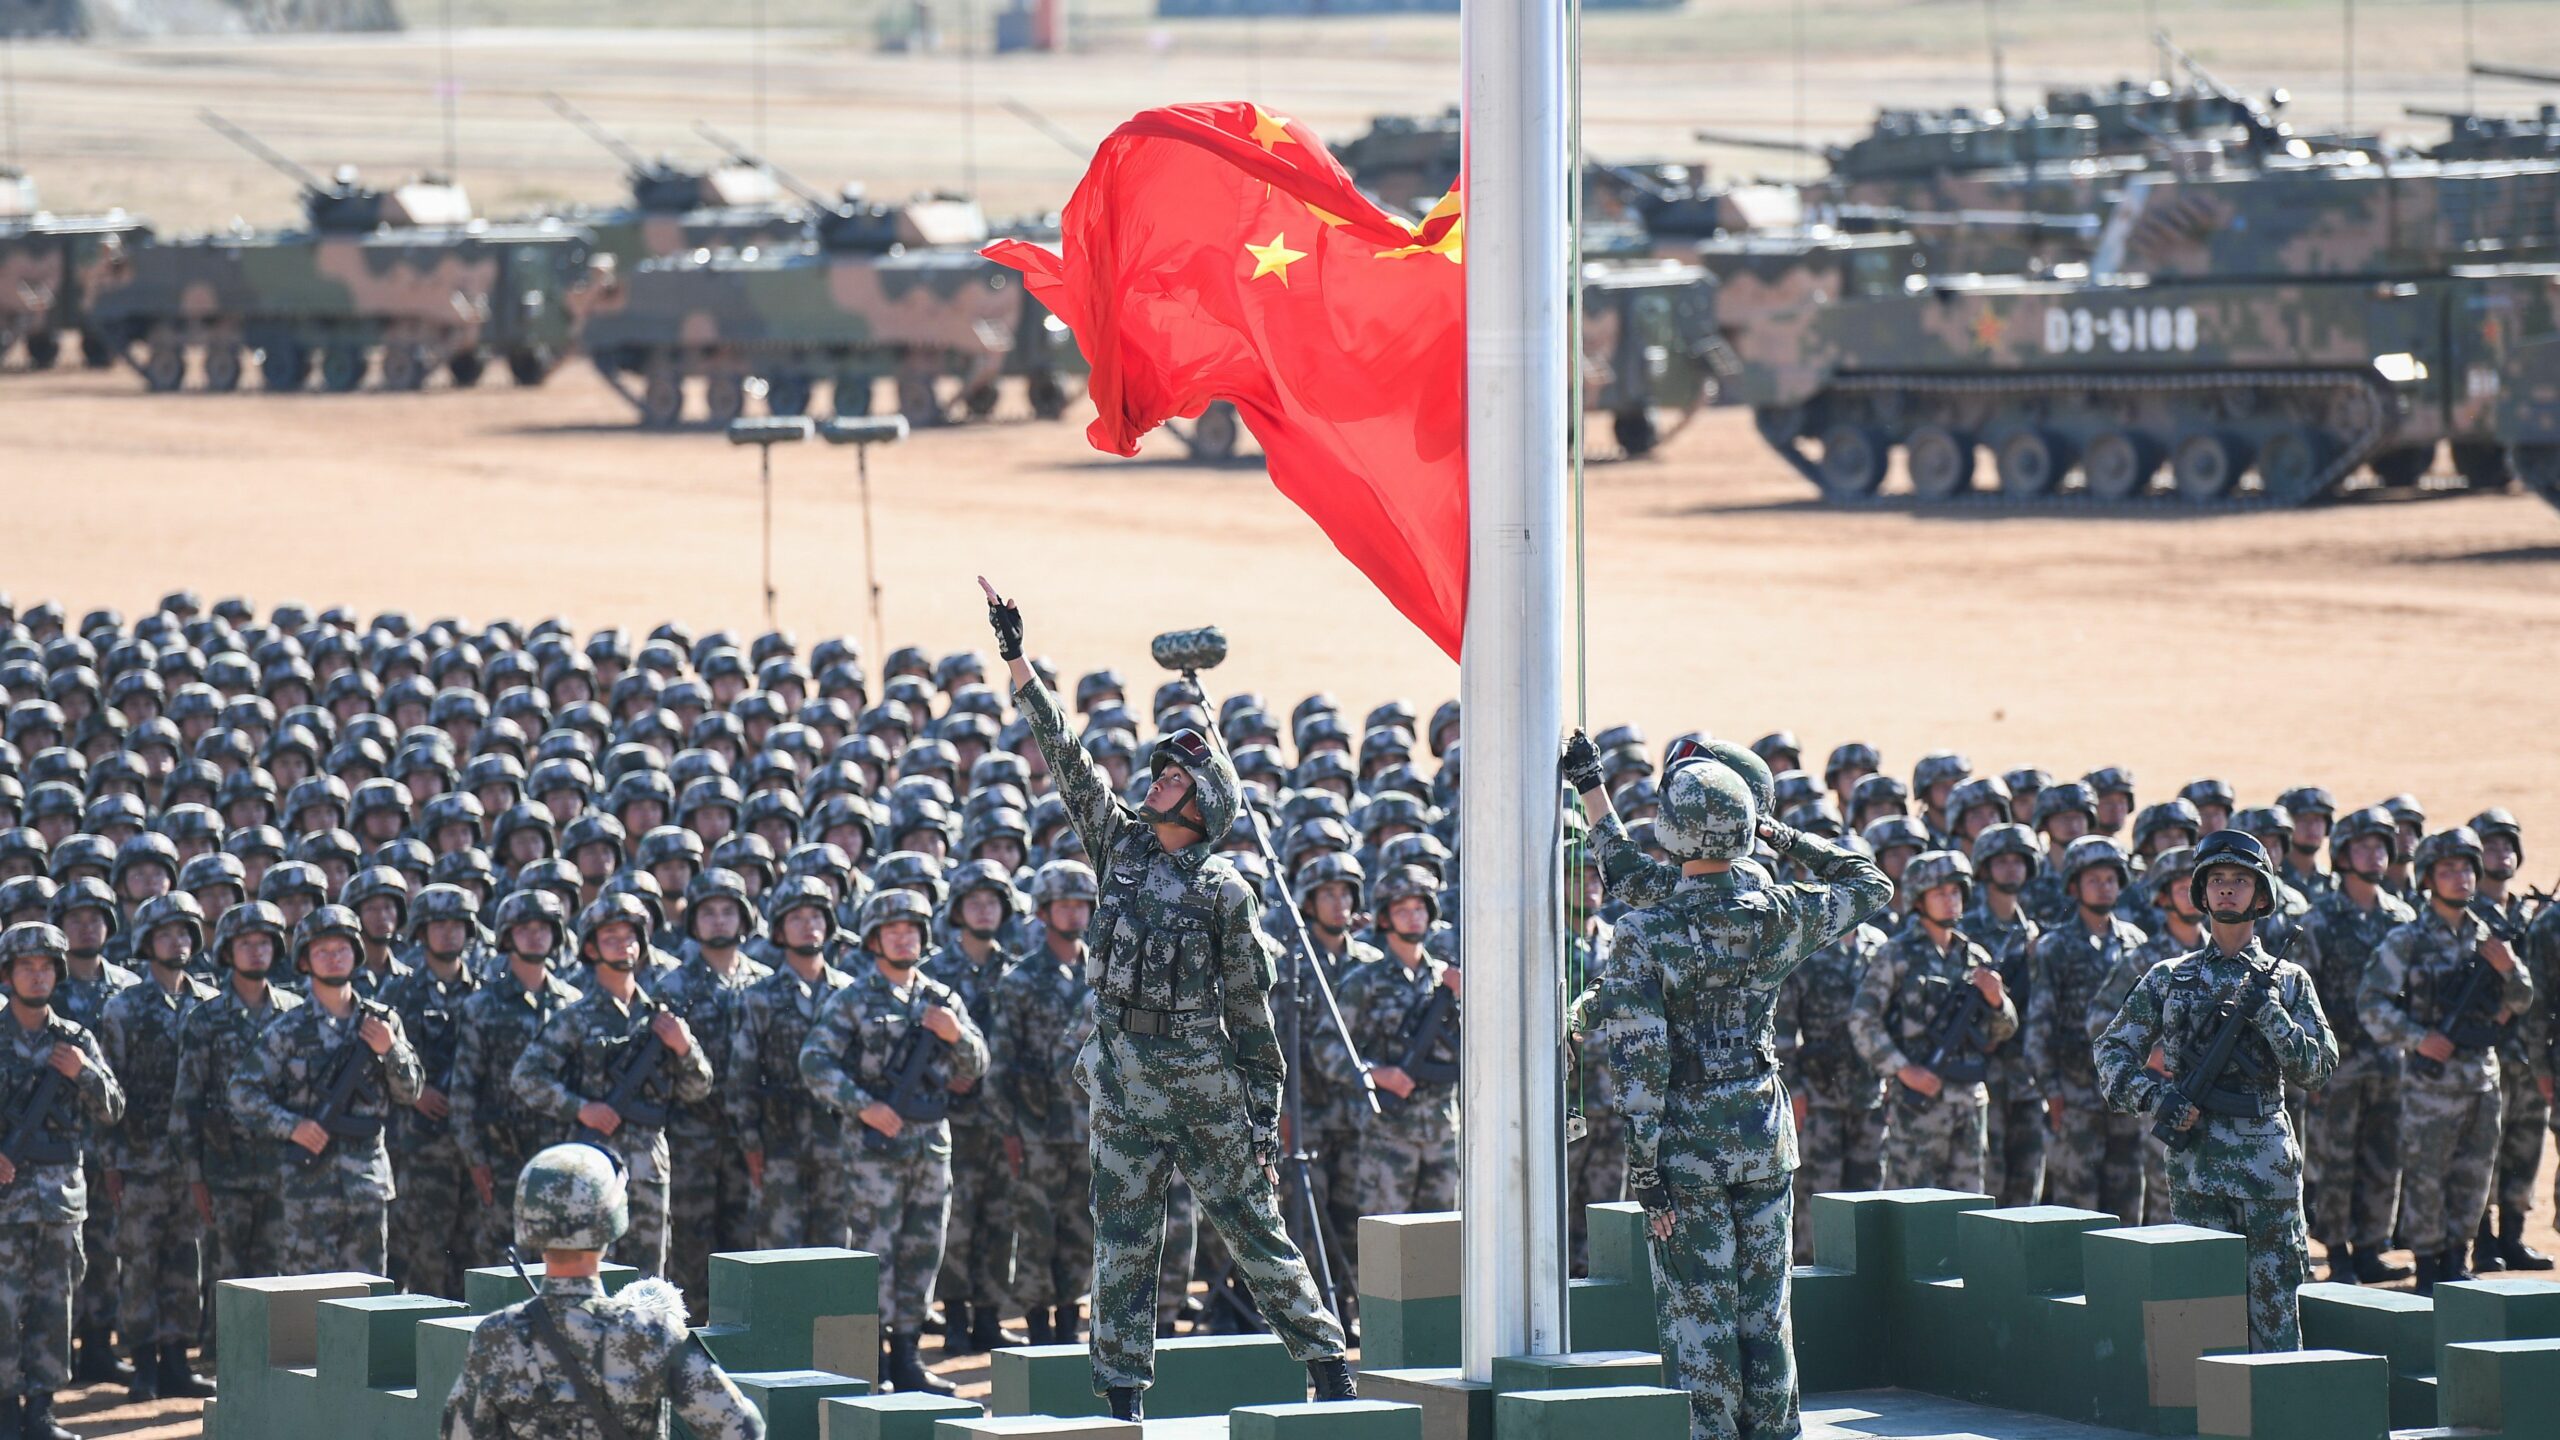 The Chinese flag is raised during a military parade at the Zhurihe training base